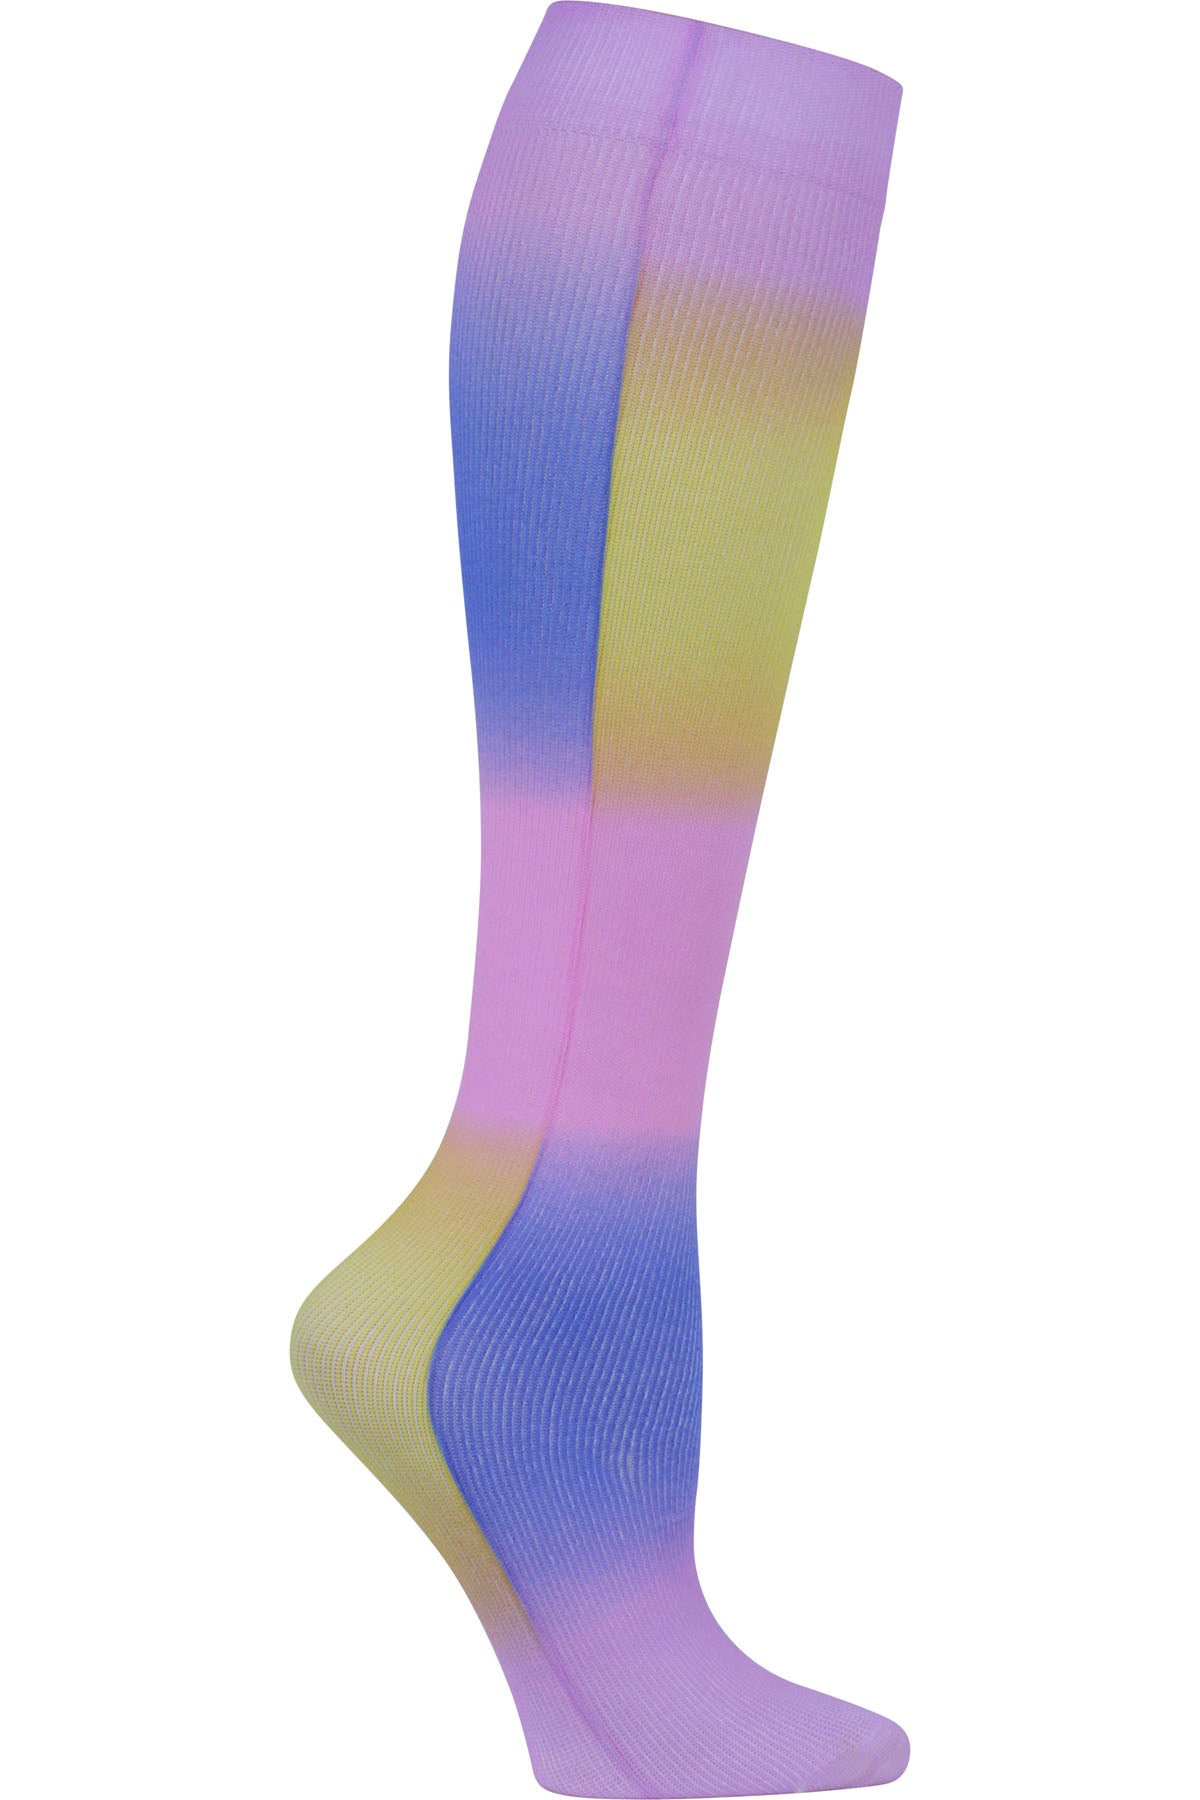 Celeste Stein Mild Compression Socks 8-15 mmHG Ombre Away at Parker's Clothing and Shoes.